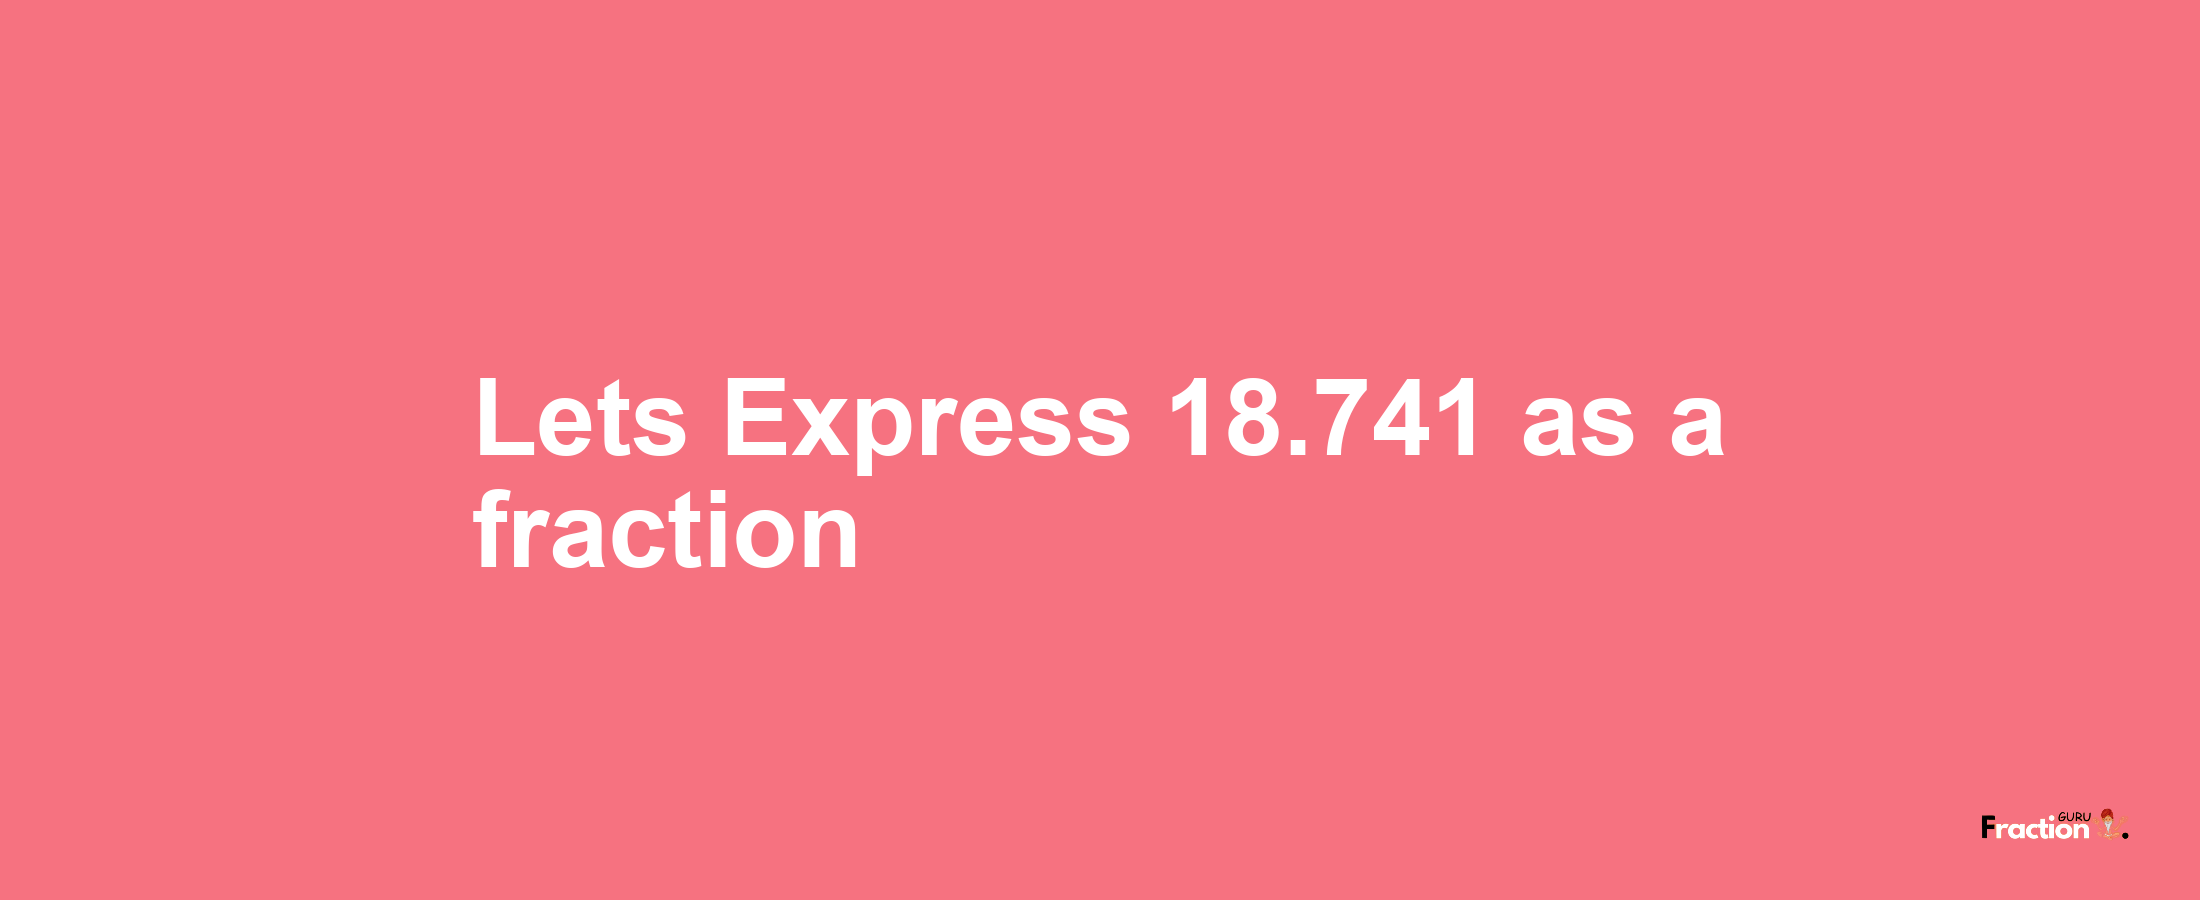 Lets Express 18.741 as afraction